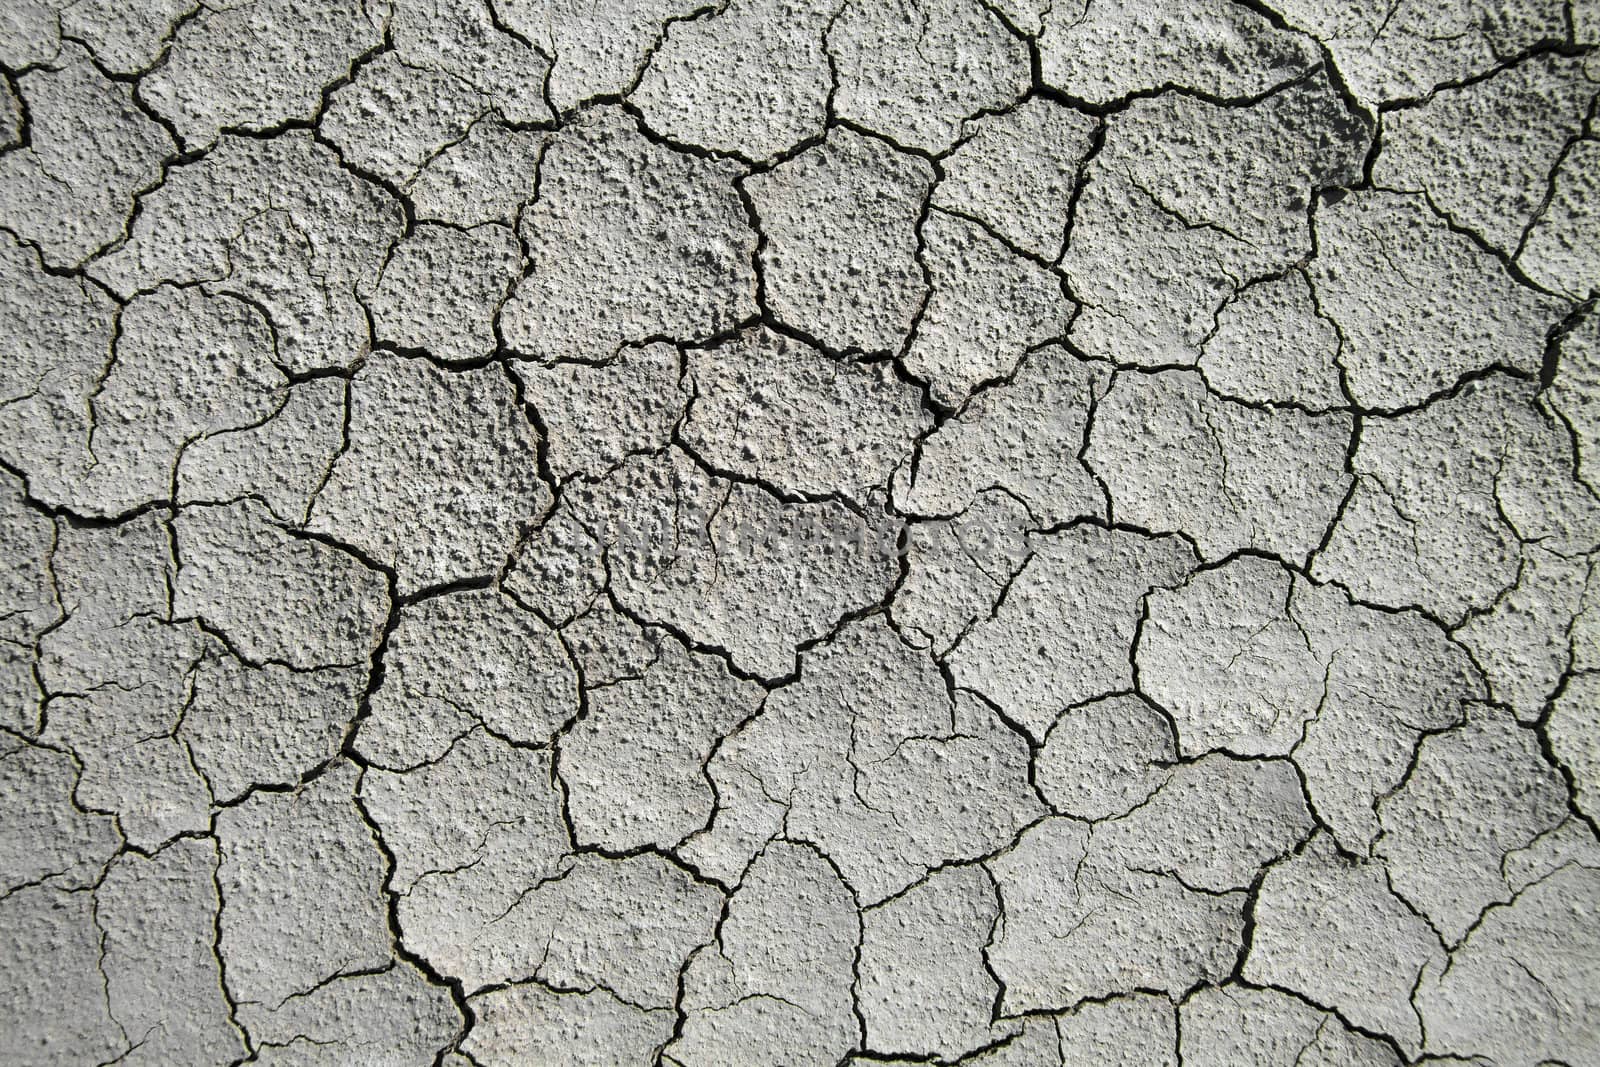 Dry cracked soil by Lamarinx